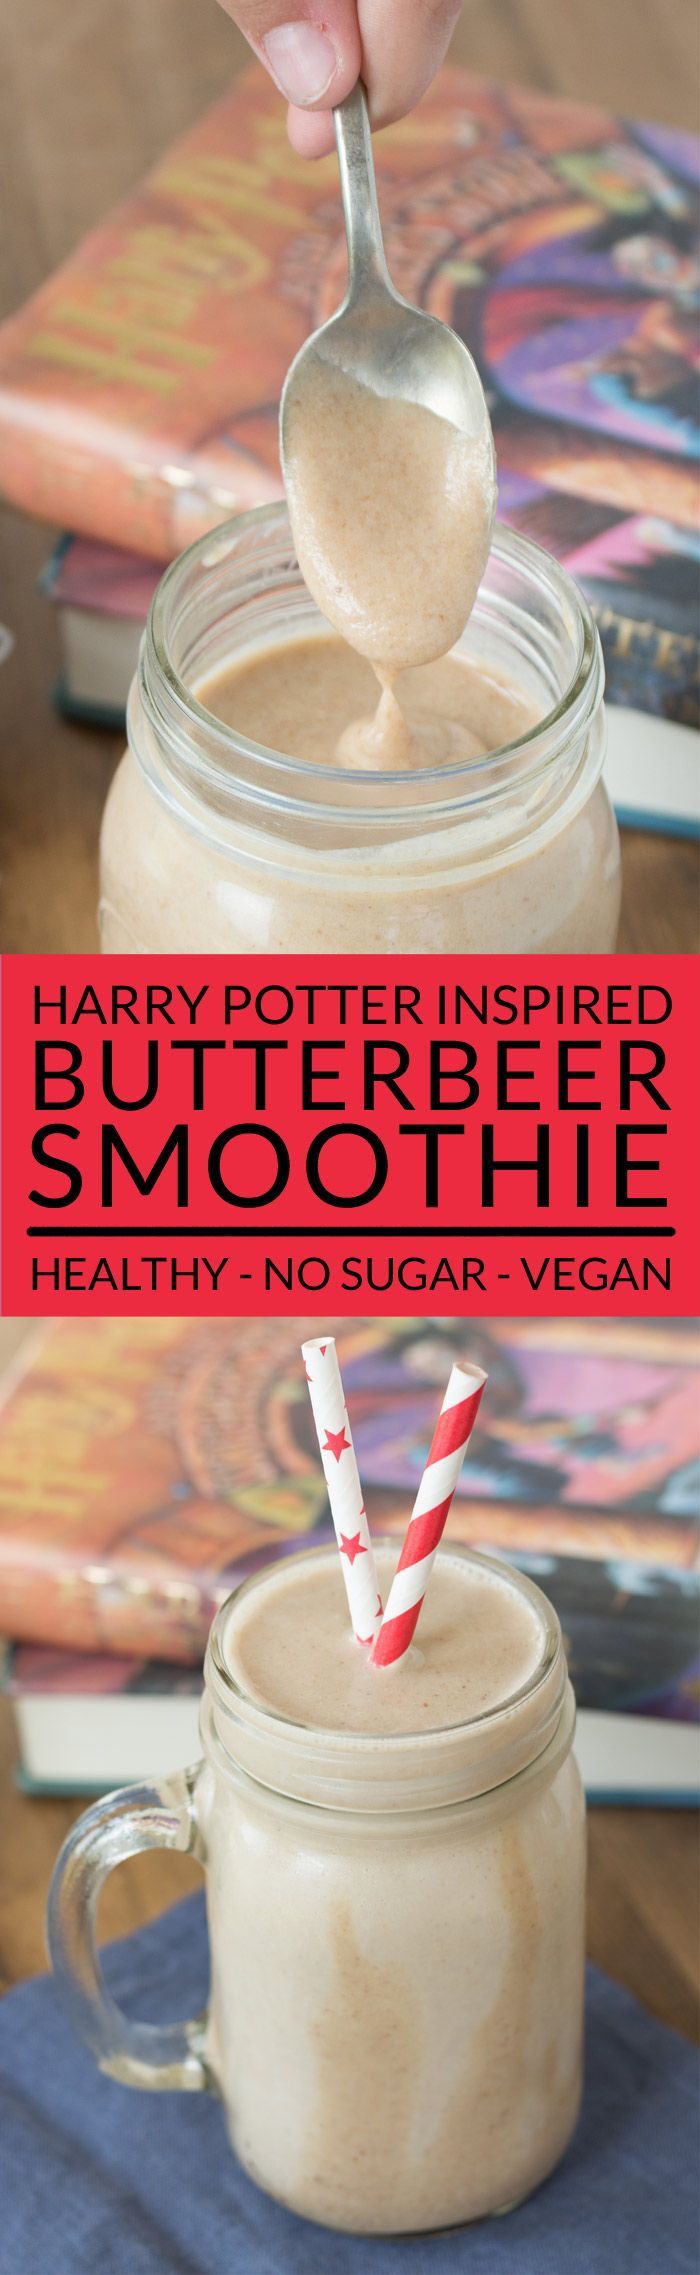 Make a homemade Harry Potter Butterbeer Smoothie and feel the magic! This easy smoothie recipe tastes like the Butterbeer sold at